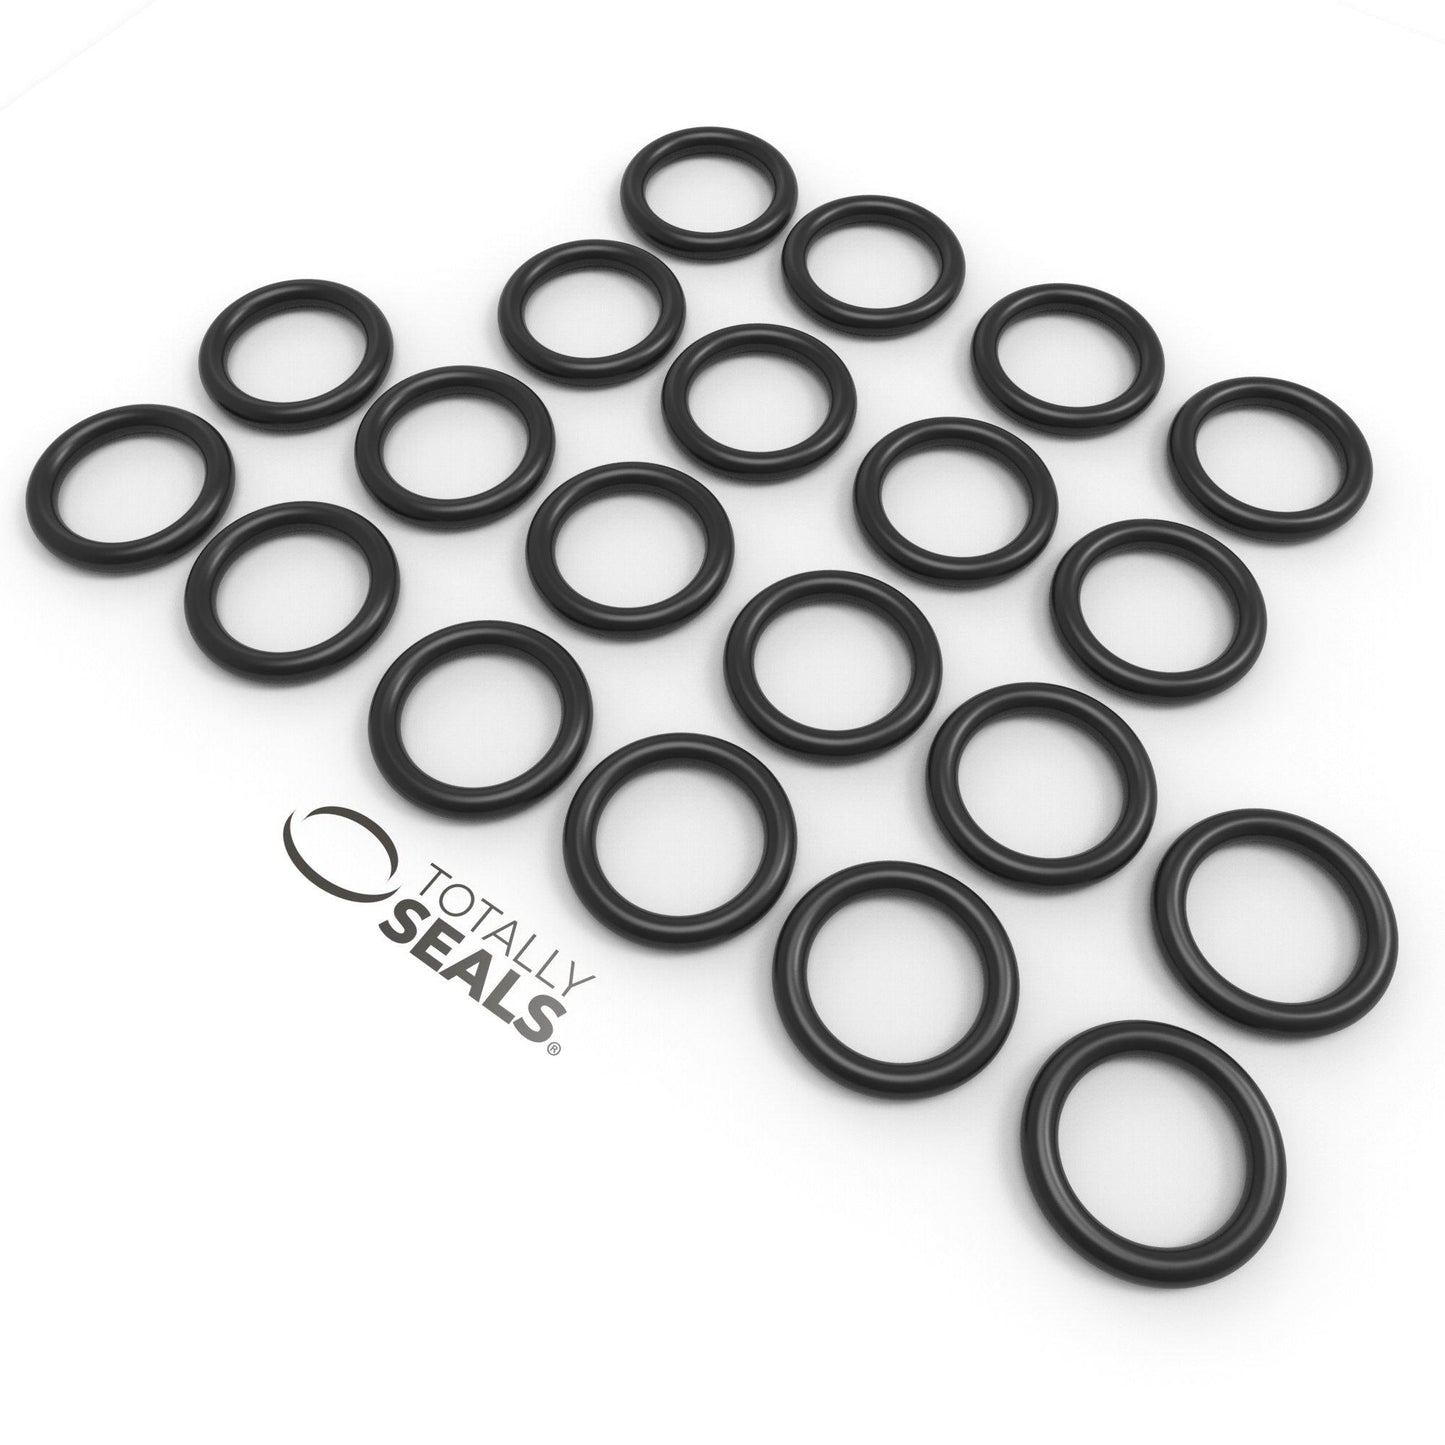 5mm x 1mm (7mm OD) Nitrile O-Rings - Totally Seals®